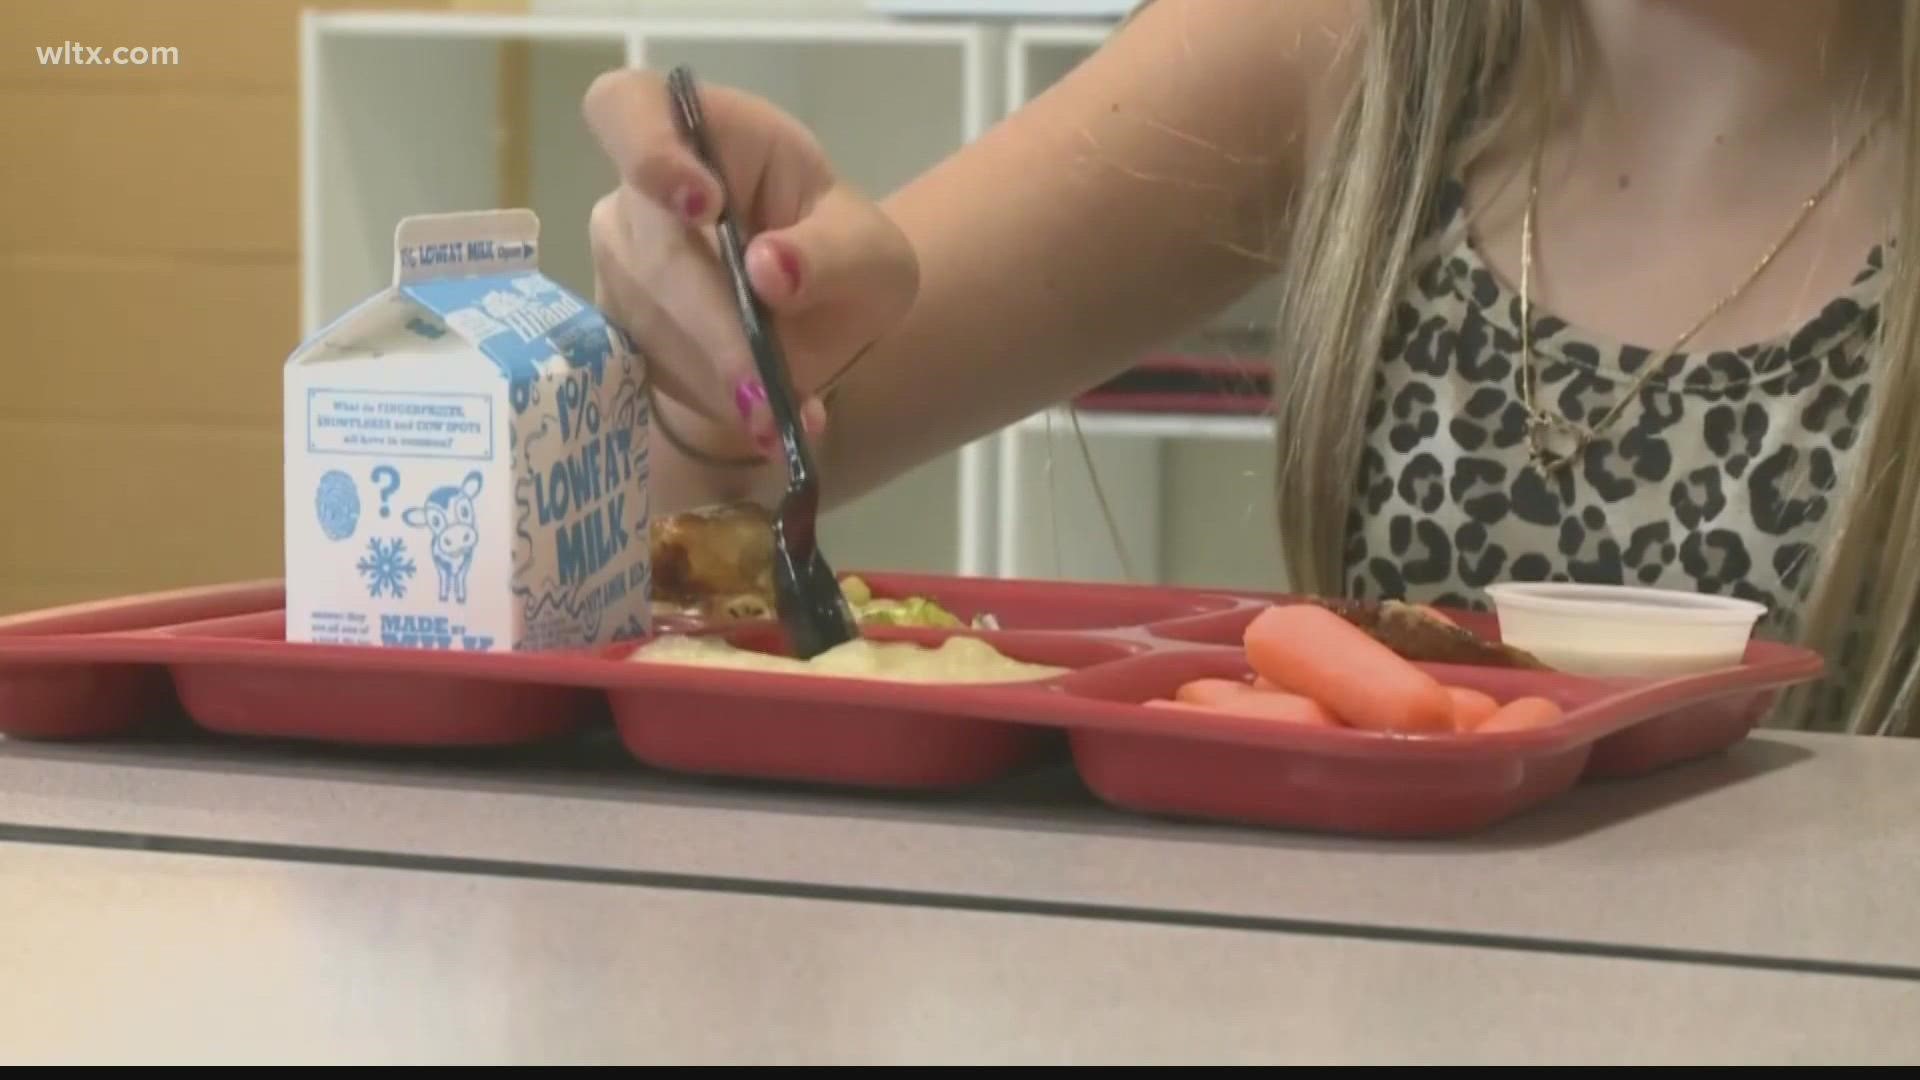 At a public meeting Wednesday, Richland School District Two officials explained their student meal policy and said no students will be denied food.